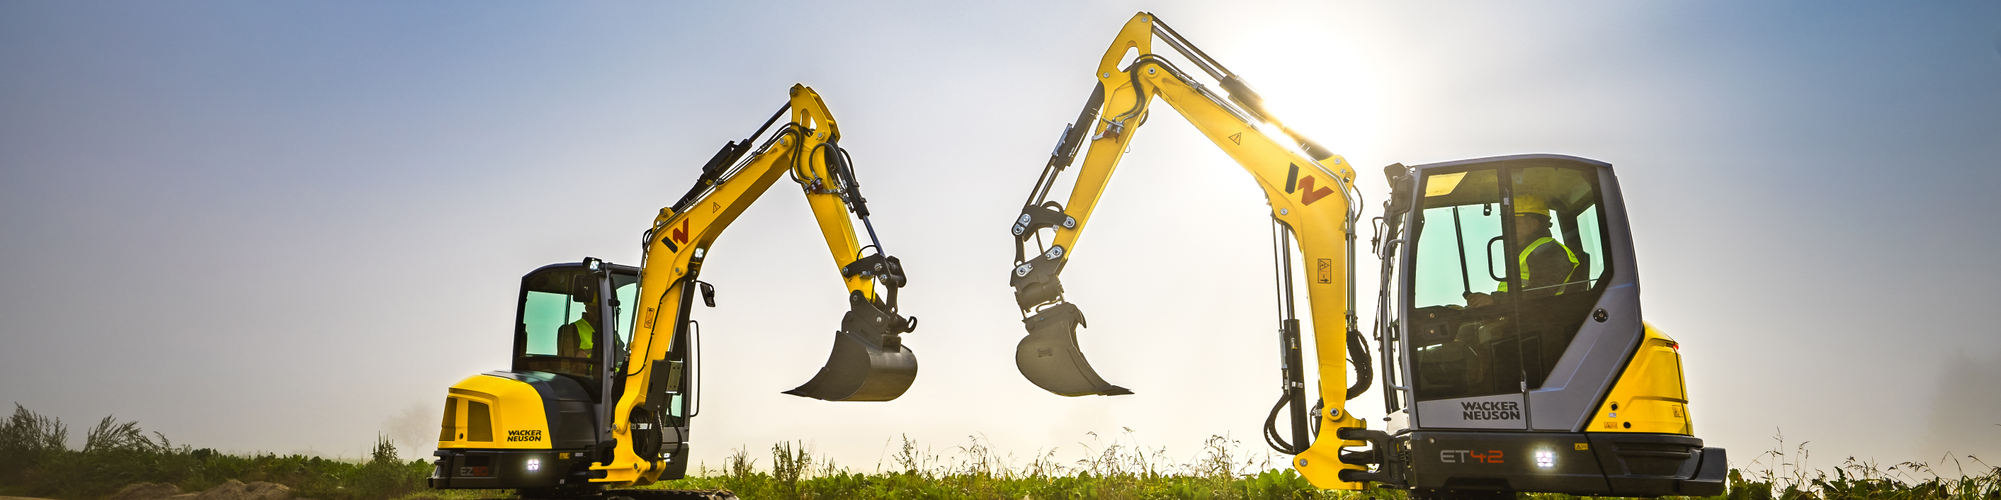 Two Wacker Neuson tracked excavators standing on a construction site.